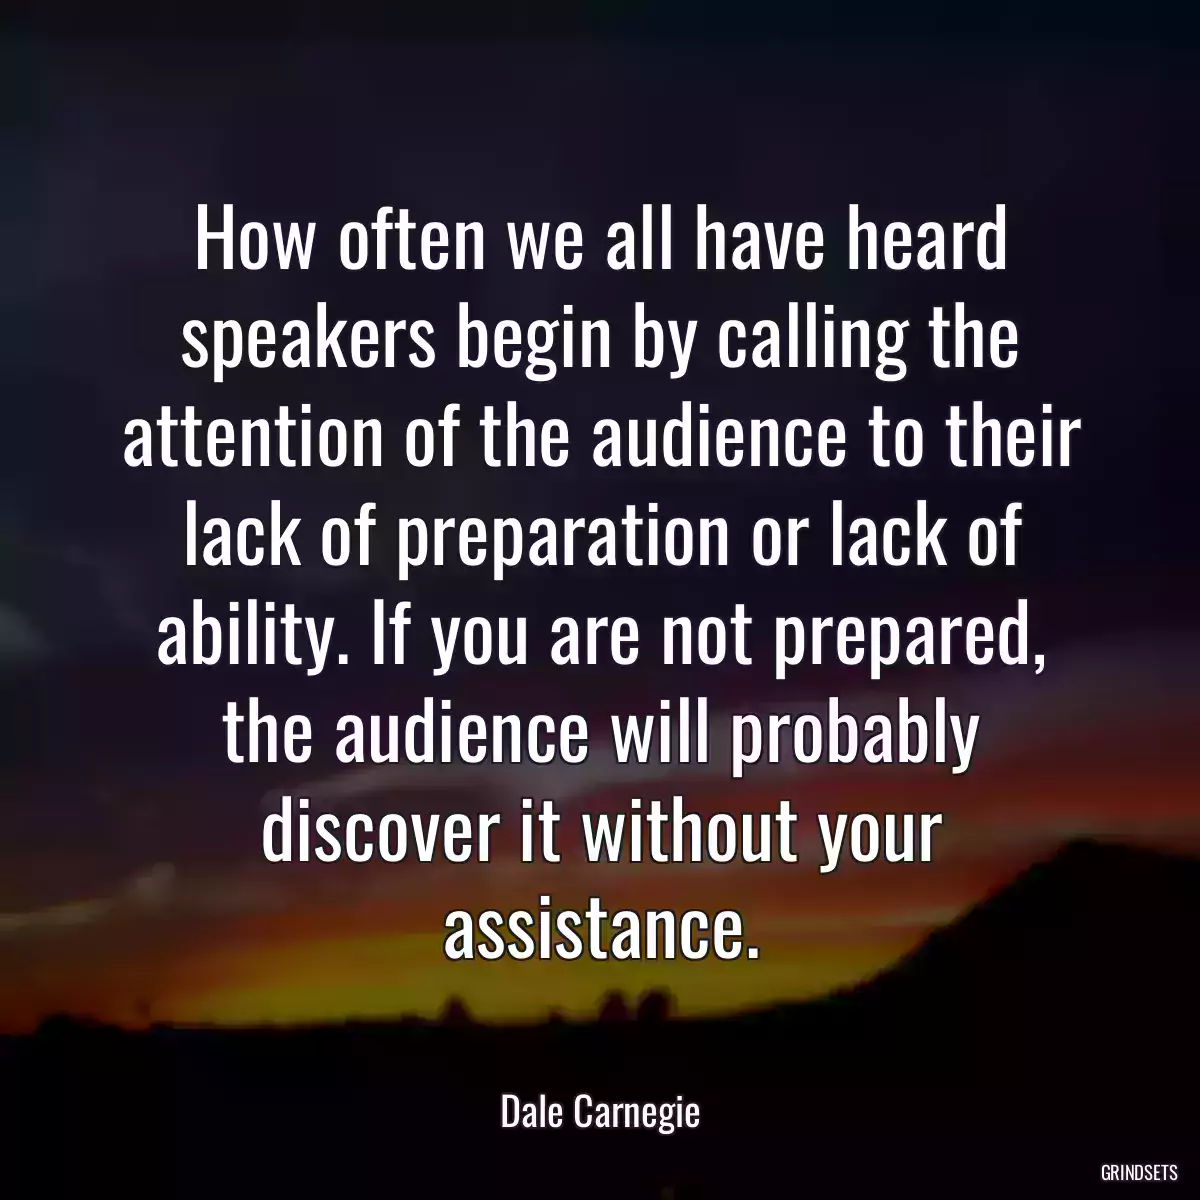 How often we all have heard speakers begin by calling the attention of the audience to their lack of preparation or lack of ability. If you are not prepared, the audience will probably discover it without your assistance.